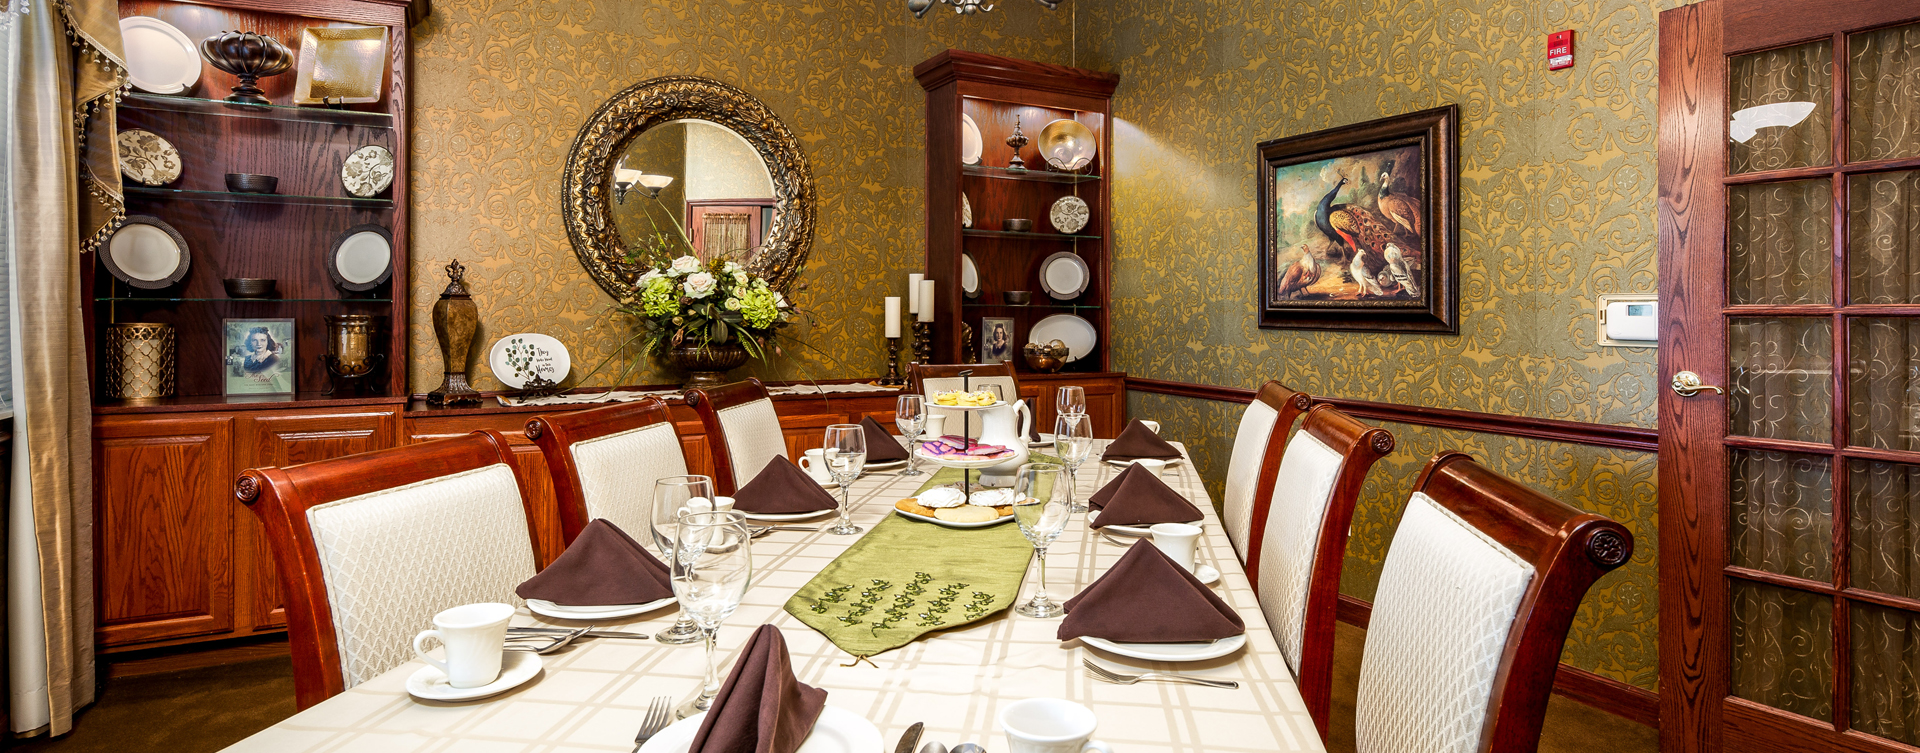 Food is best when shared with family and friends in the private dining room at Bickford of Battle Creek